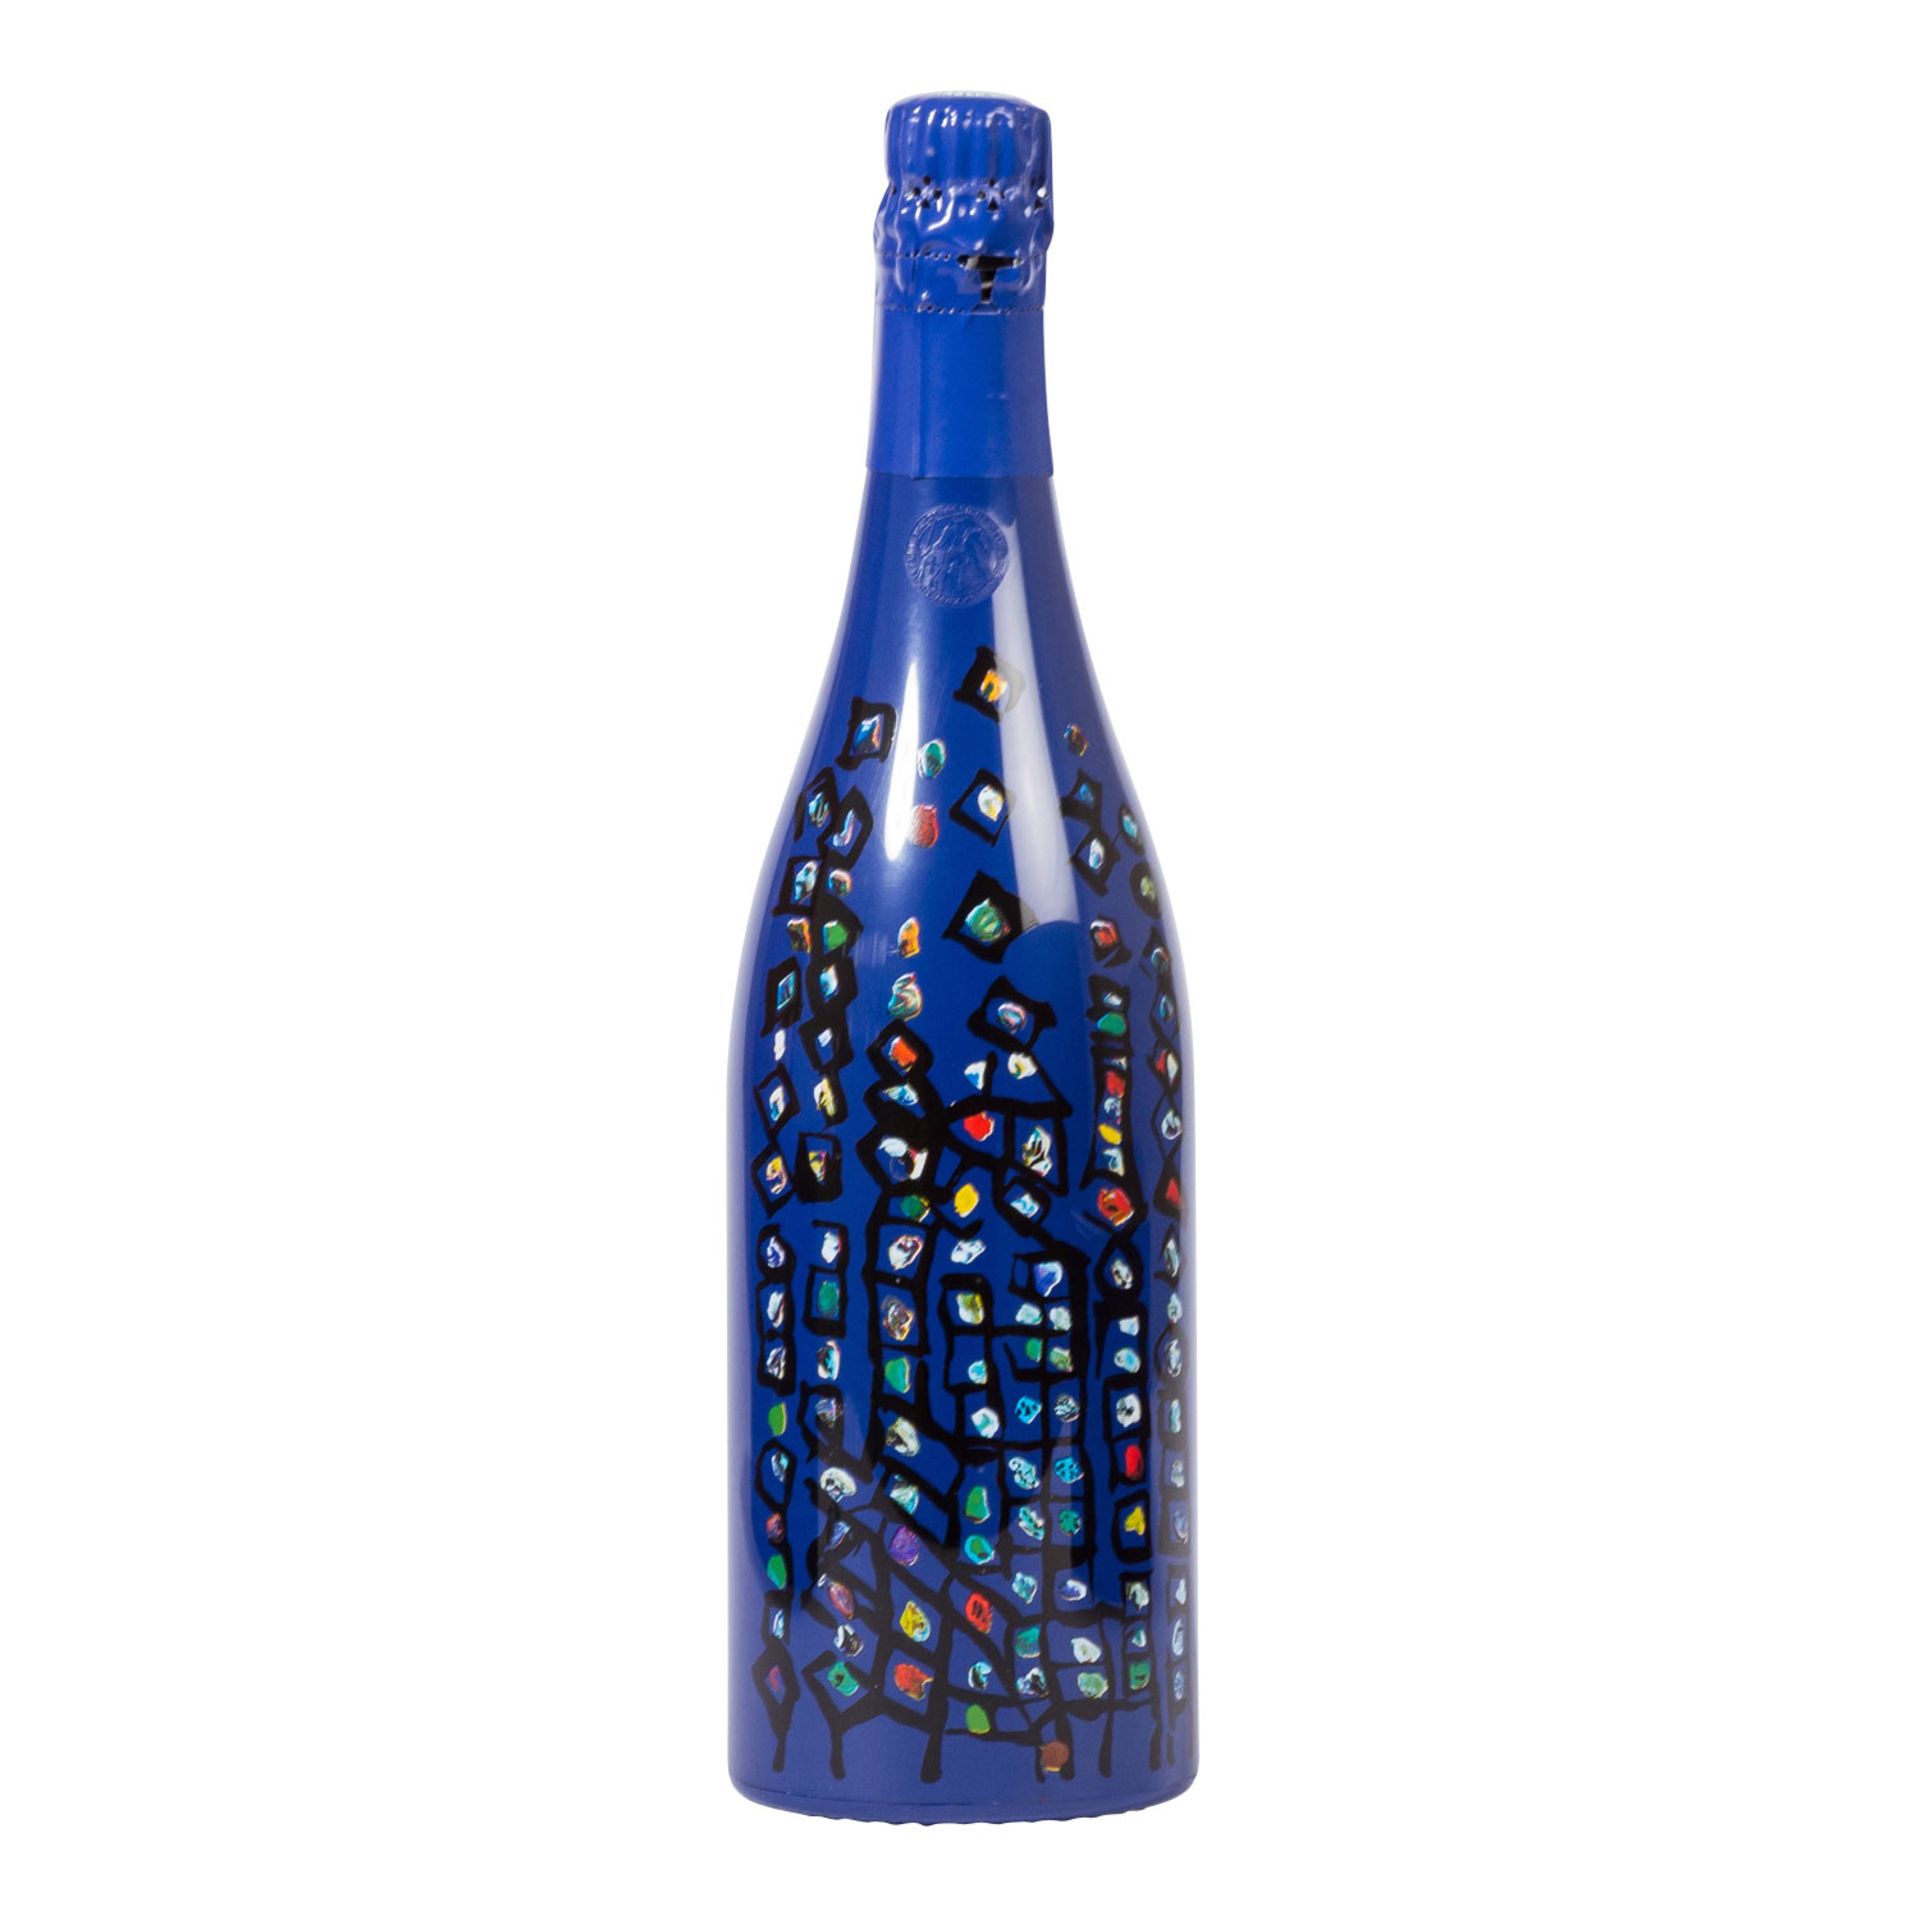 TAITTINGER Champagner 'Collection' 1 Flasche 'Corneille' 1990 - Image 3 of 5